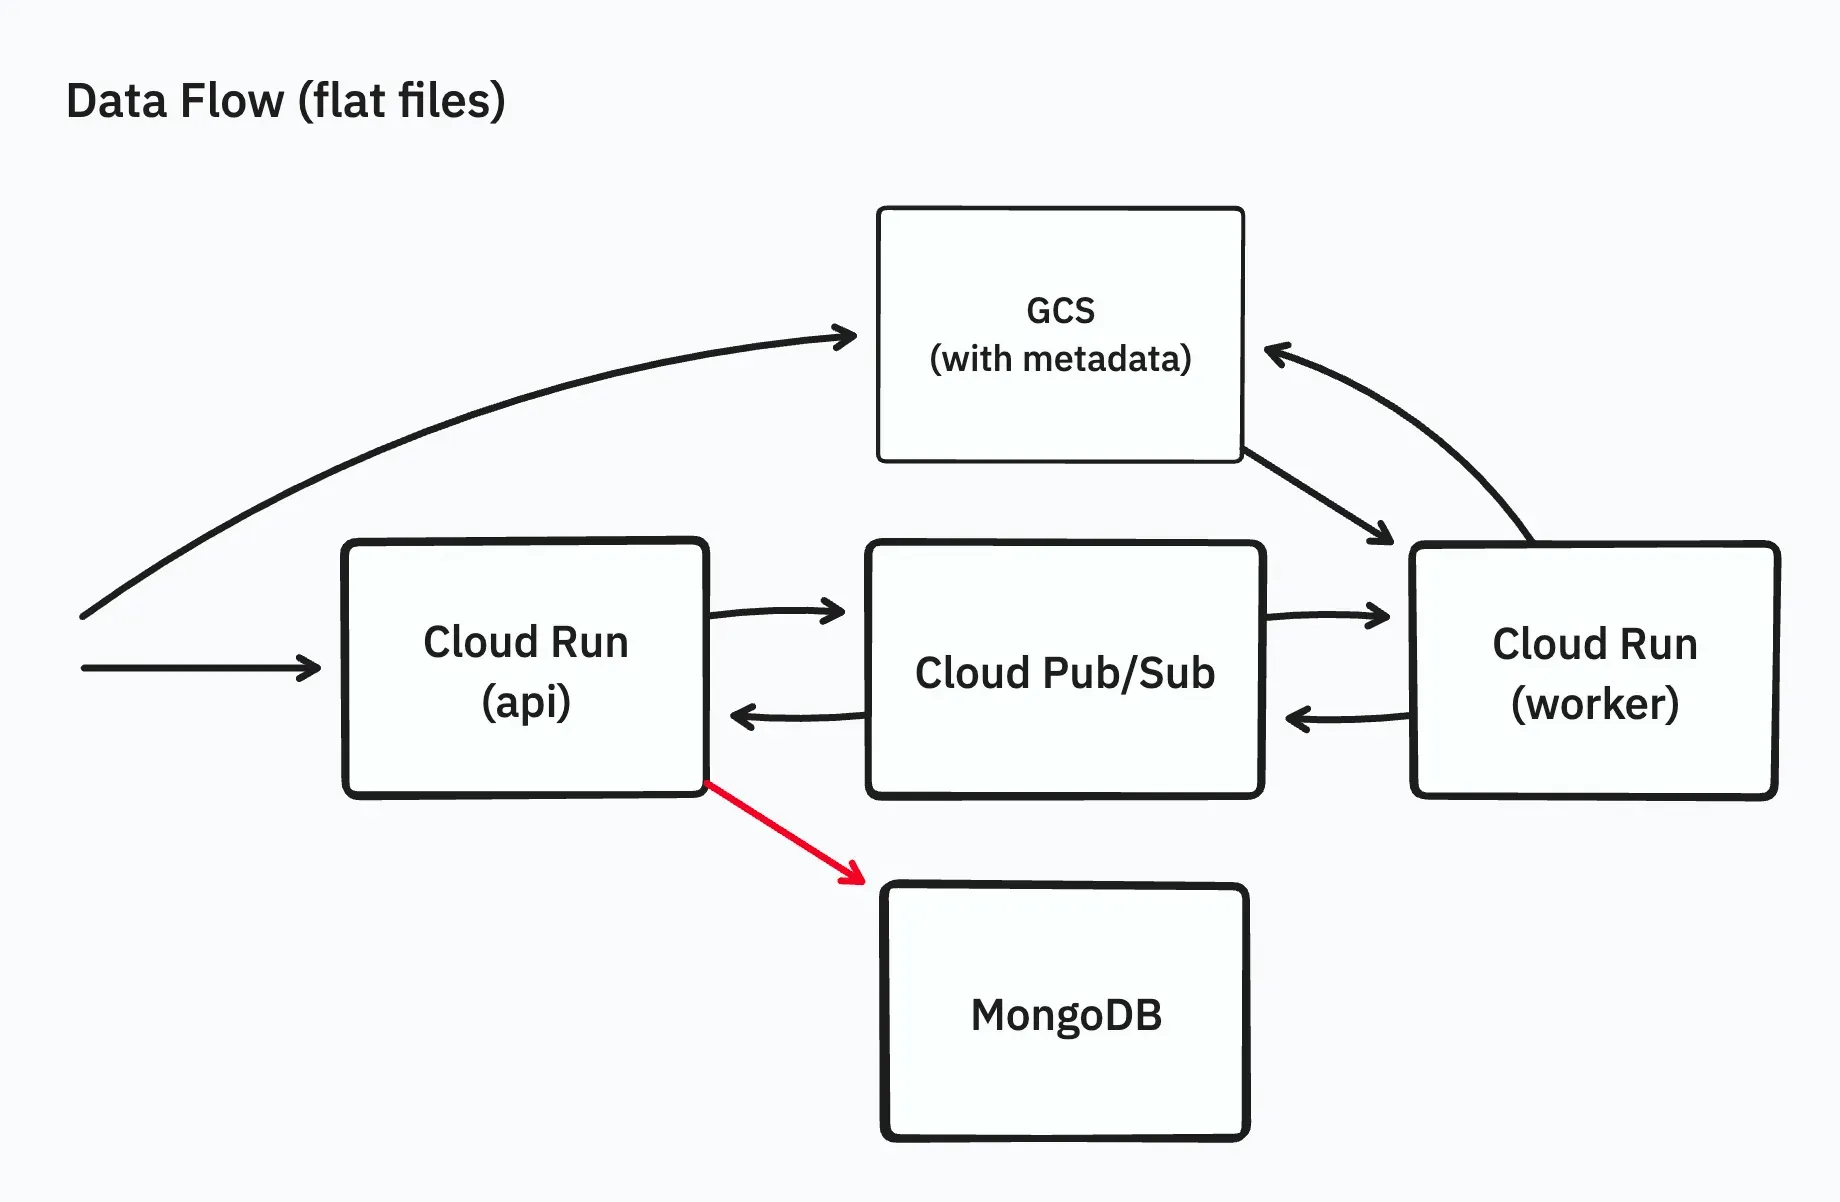 Optimize the part that writes deployment results from the API server to MongoDB